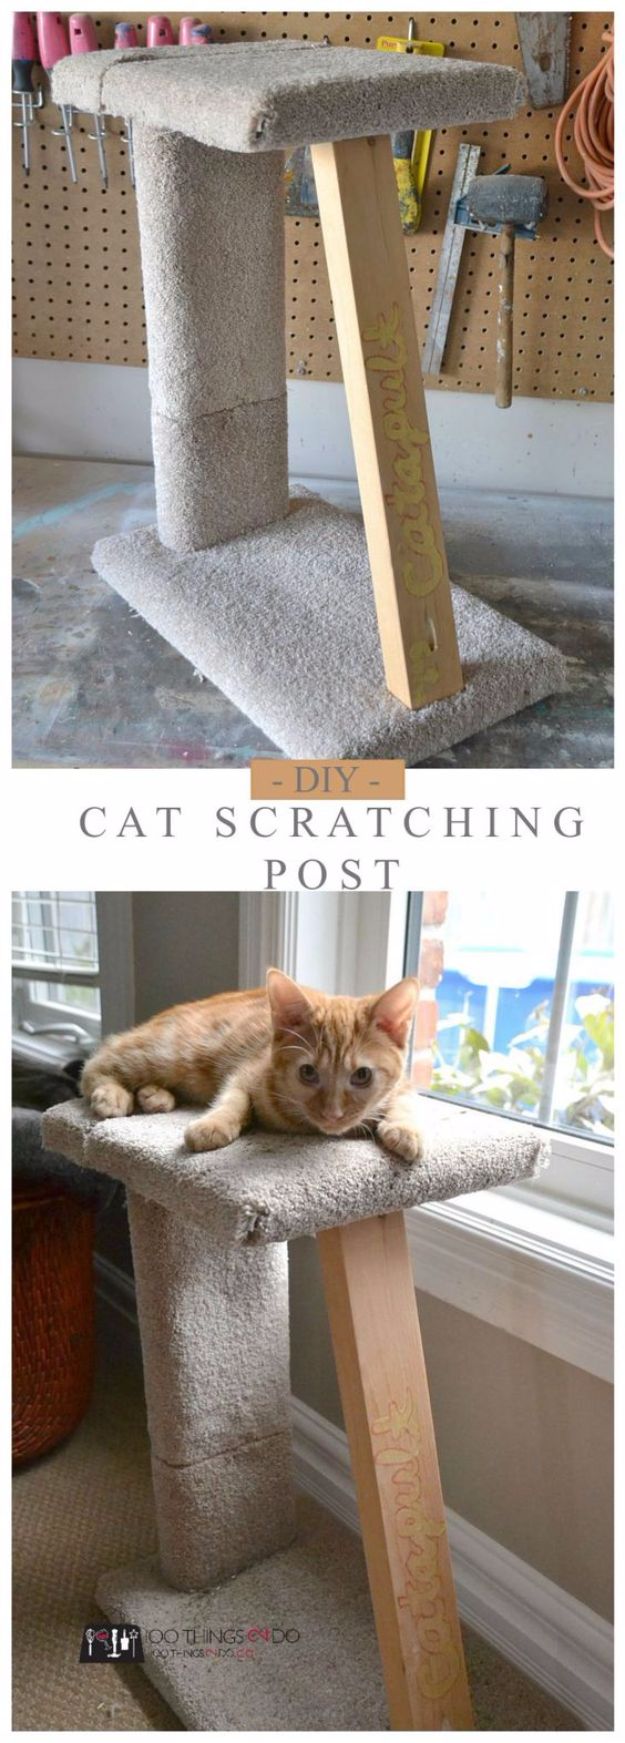 DIY Ideas With Carpet Scraps - DIY Cat Scratching Post - Cool Crafts To Make With Old Carpet Remnants - Cheap Do It Yourself Gifts and Home Decor on A Budget - Creative But Cheap Ideas for Decorating Your House and Room - Painted, No Sew and Creative Arts and Craft Projects http://diyjoy.com/diy-ideas-carpet-scraps